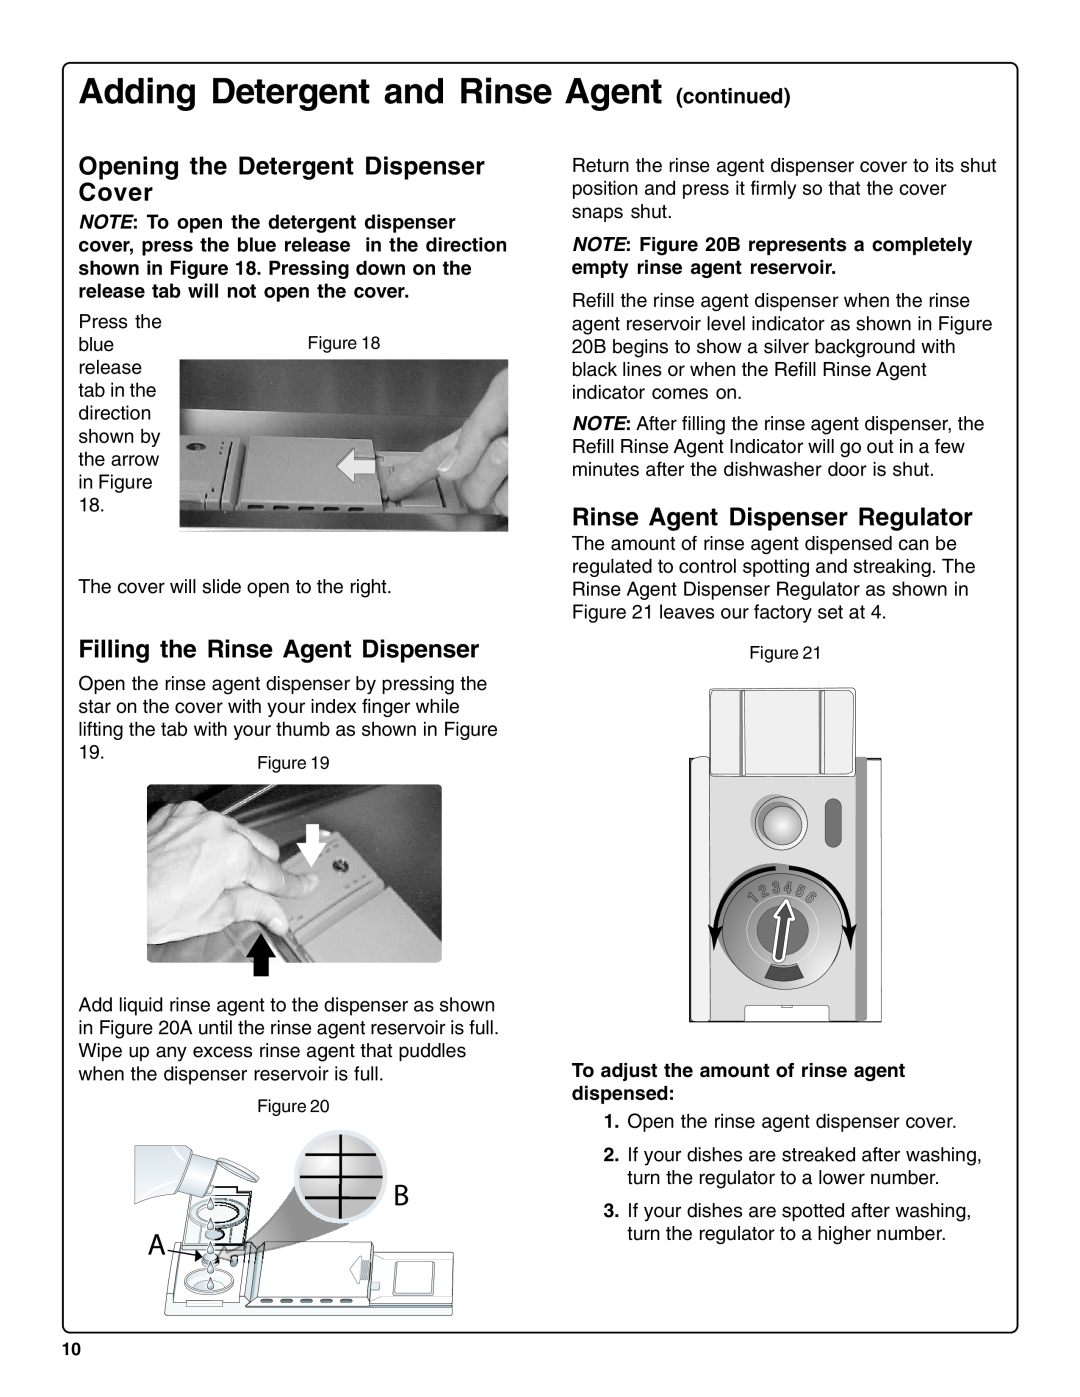 Bosch Appliances sHe43C Adding Detergent and Rinse Agent continued, Opening the Detergent Dispenser Cover 